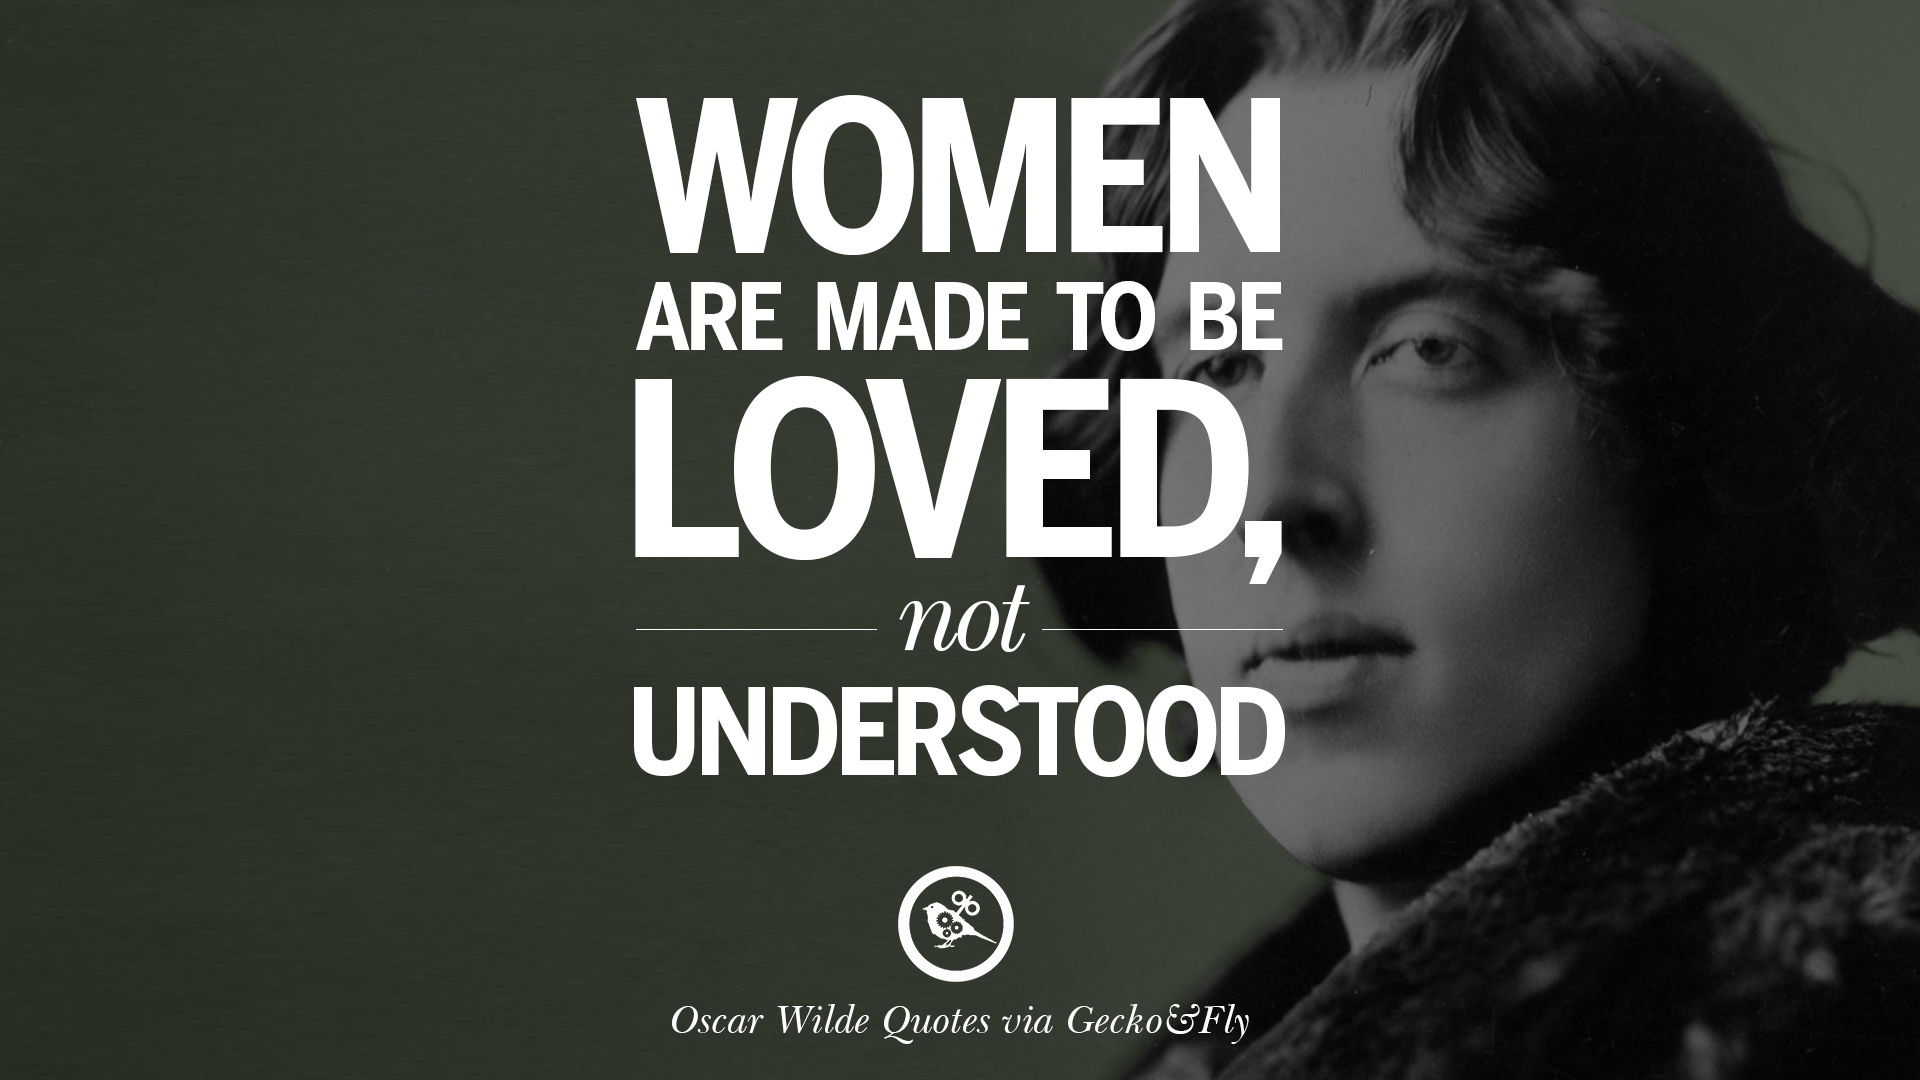 20-oscar-wilde-s-wittiest-quotes-on-life-and-wisdom